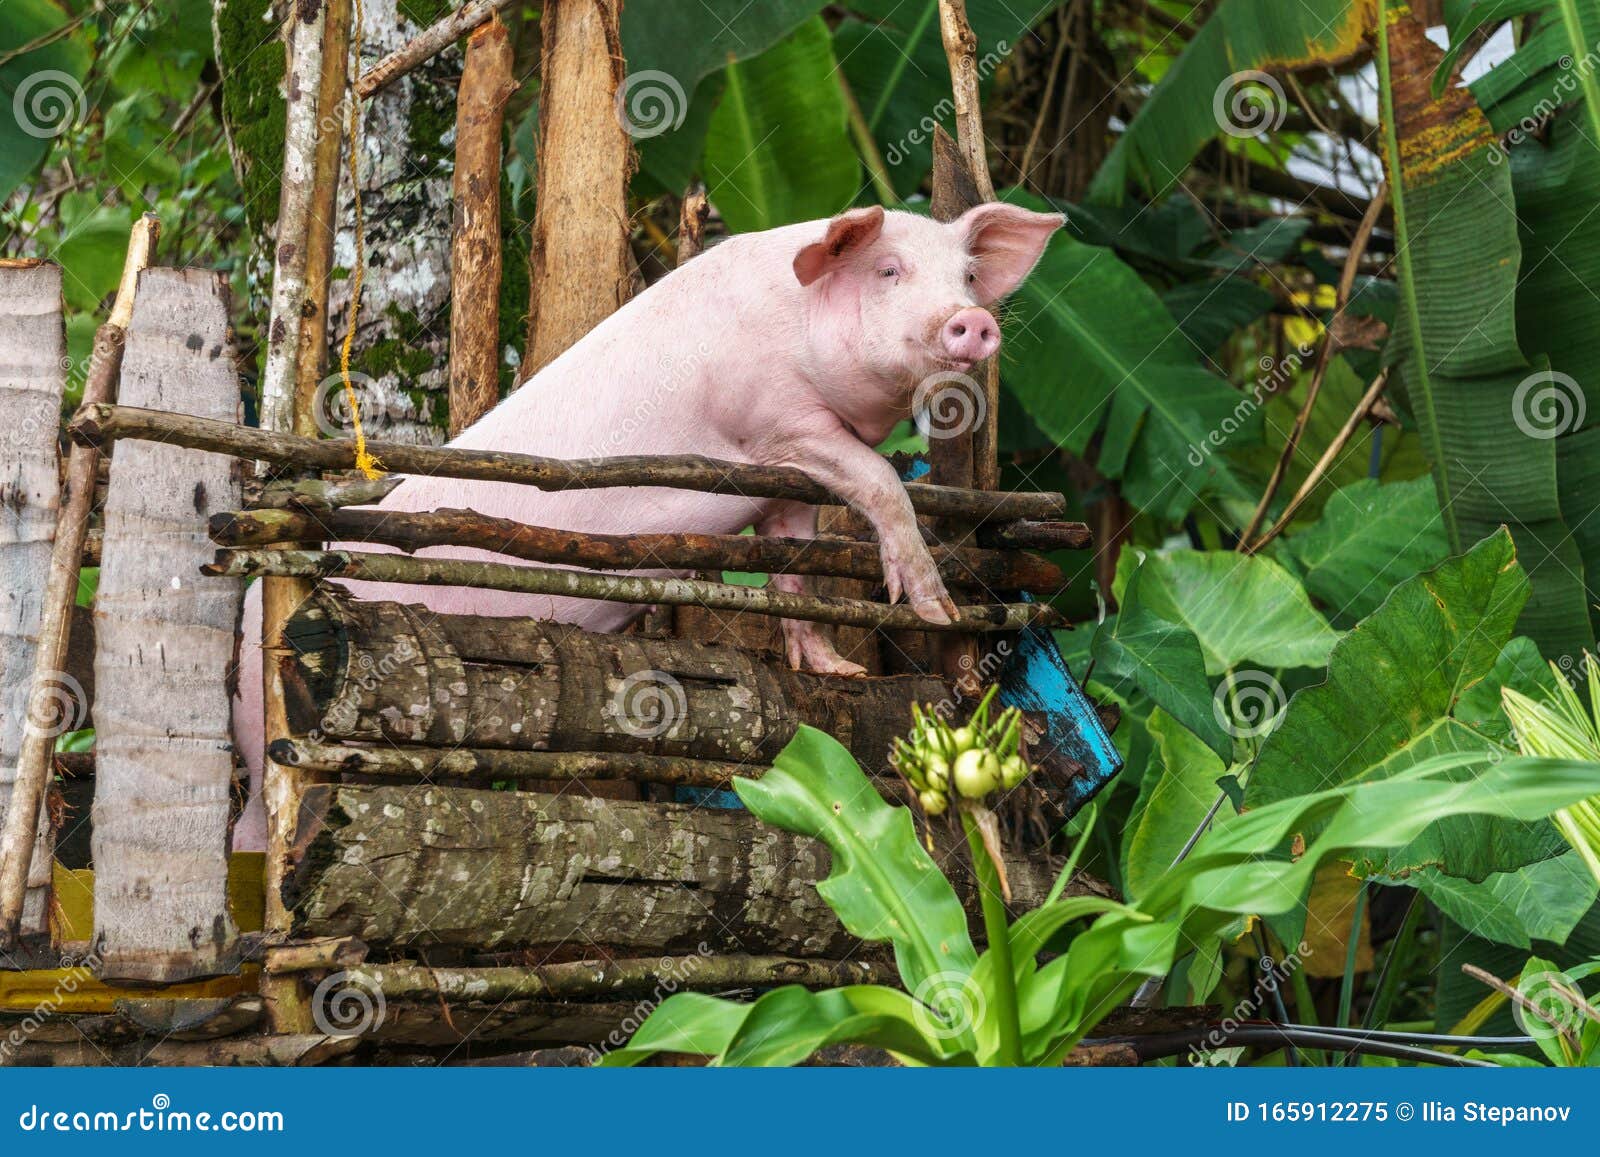 philippines. palawan island. domestic pig in a cage.